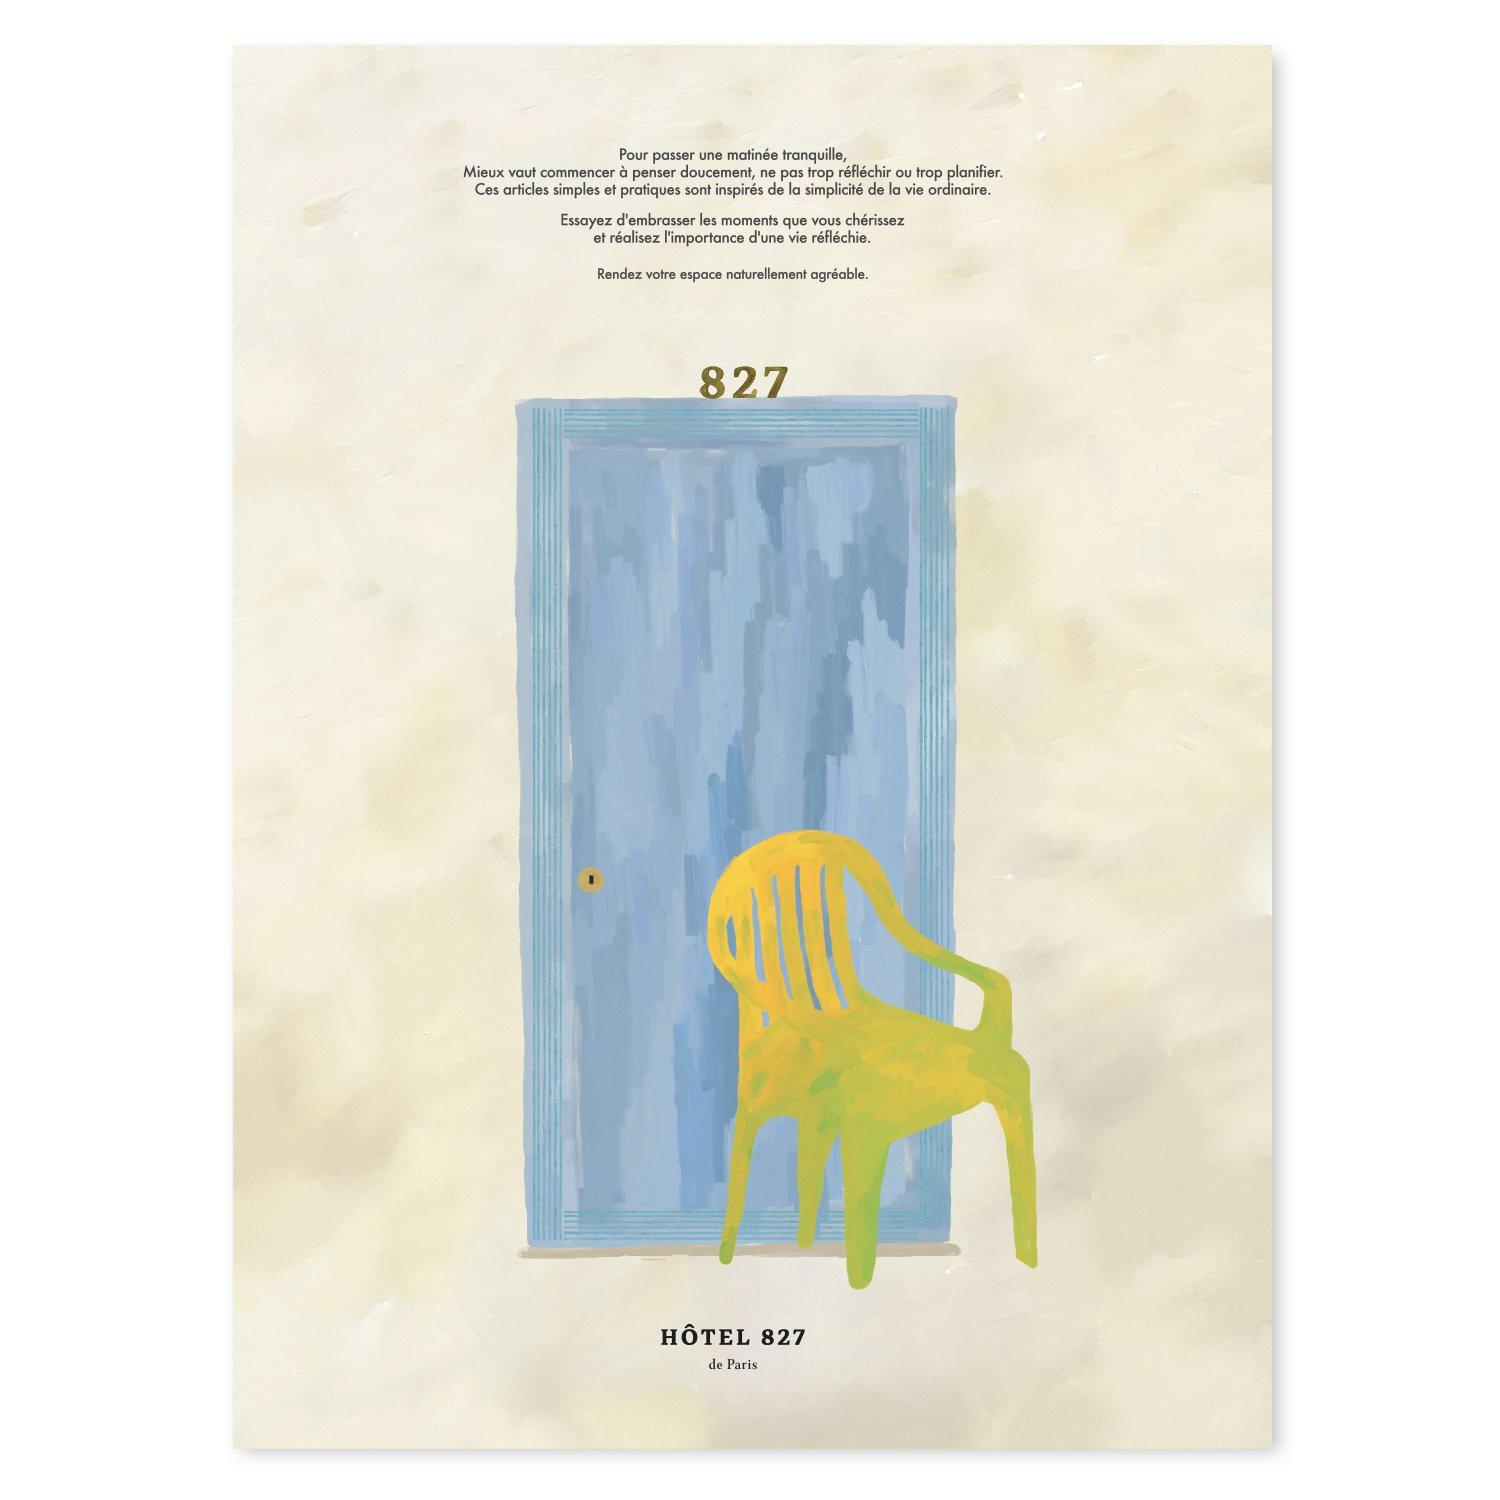 BR-1169-HOTEL PARIS CHILL-HOTEL PARIS CHILL ポストカード｜The Door with Yellow Chair